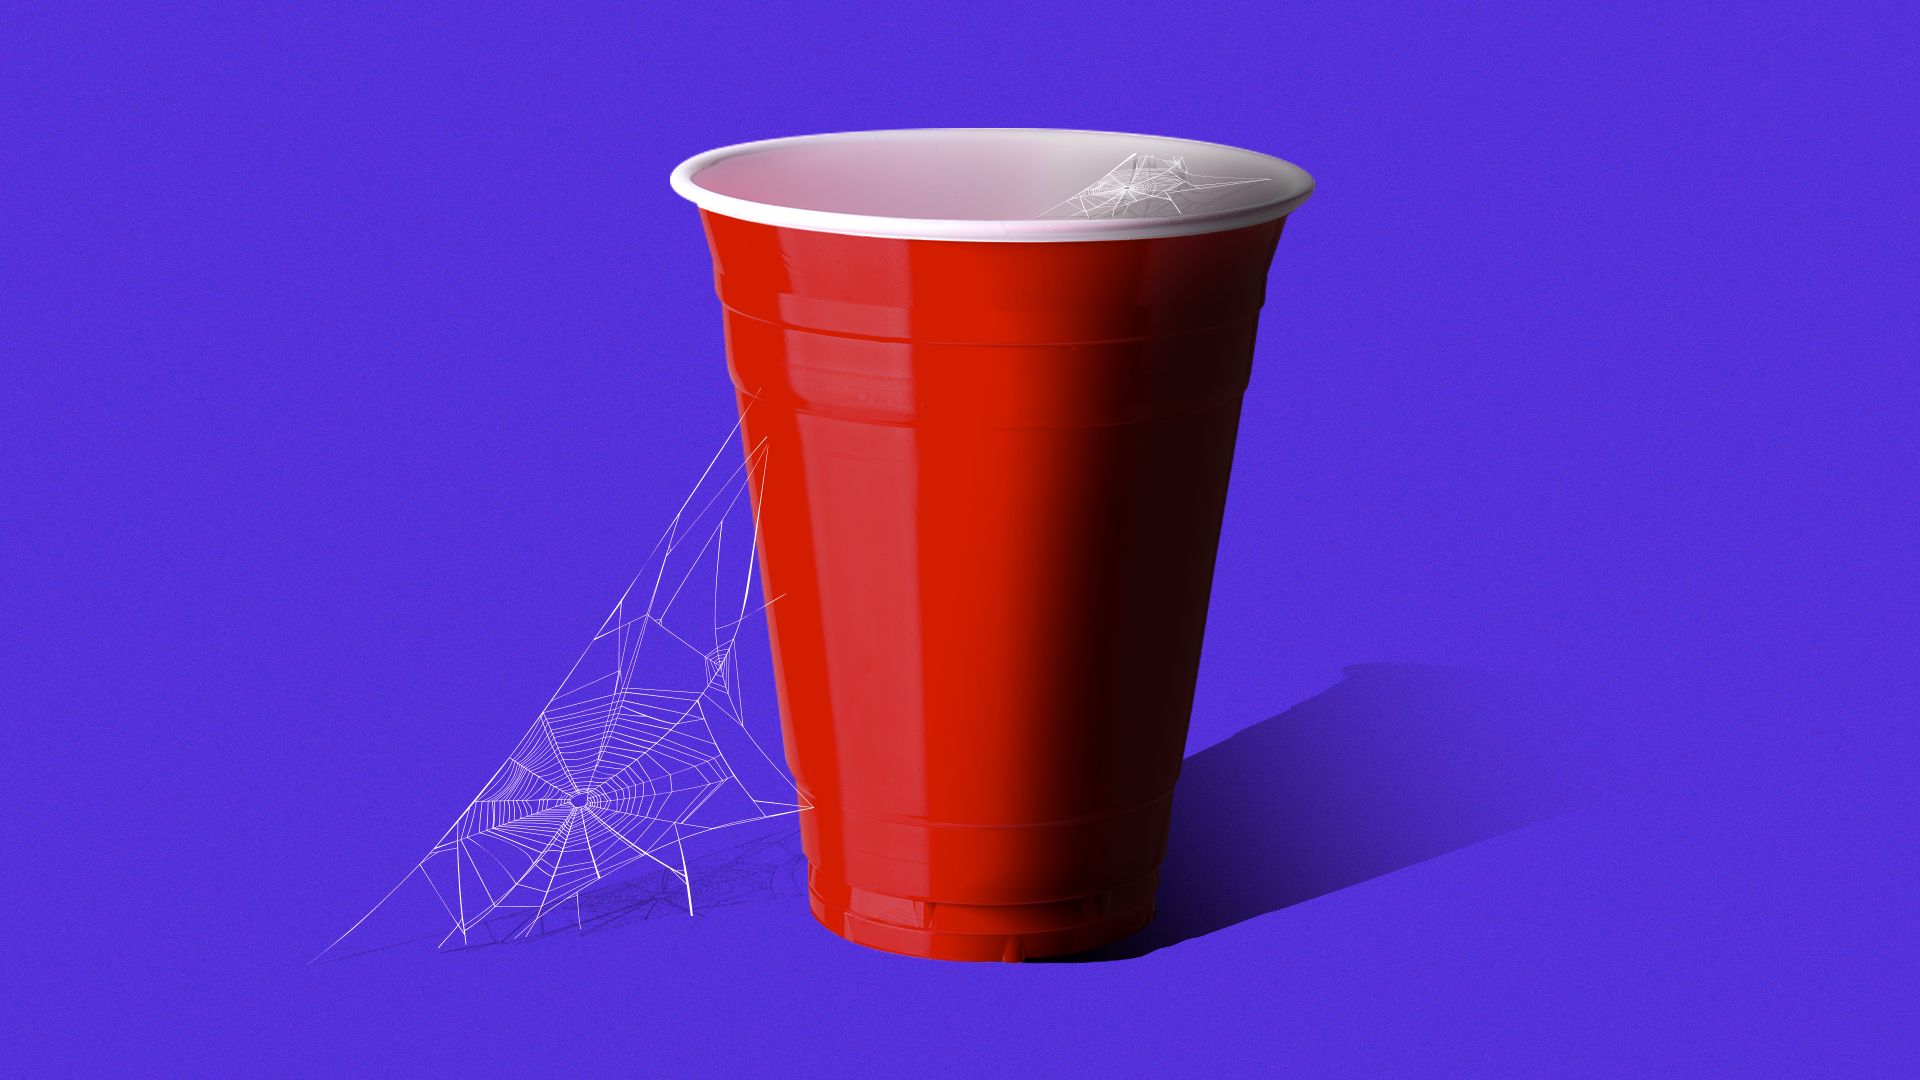 Illustration of a red Solo cup with cobwebs on it.